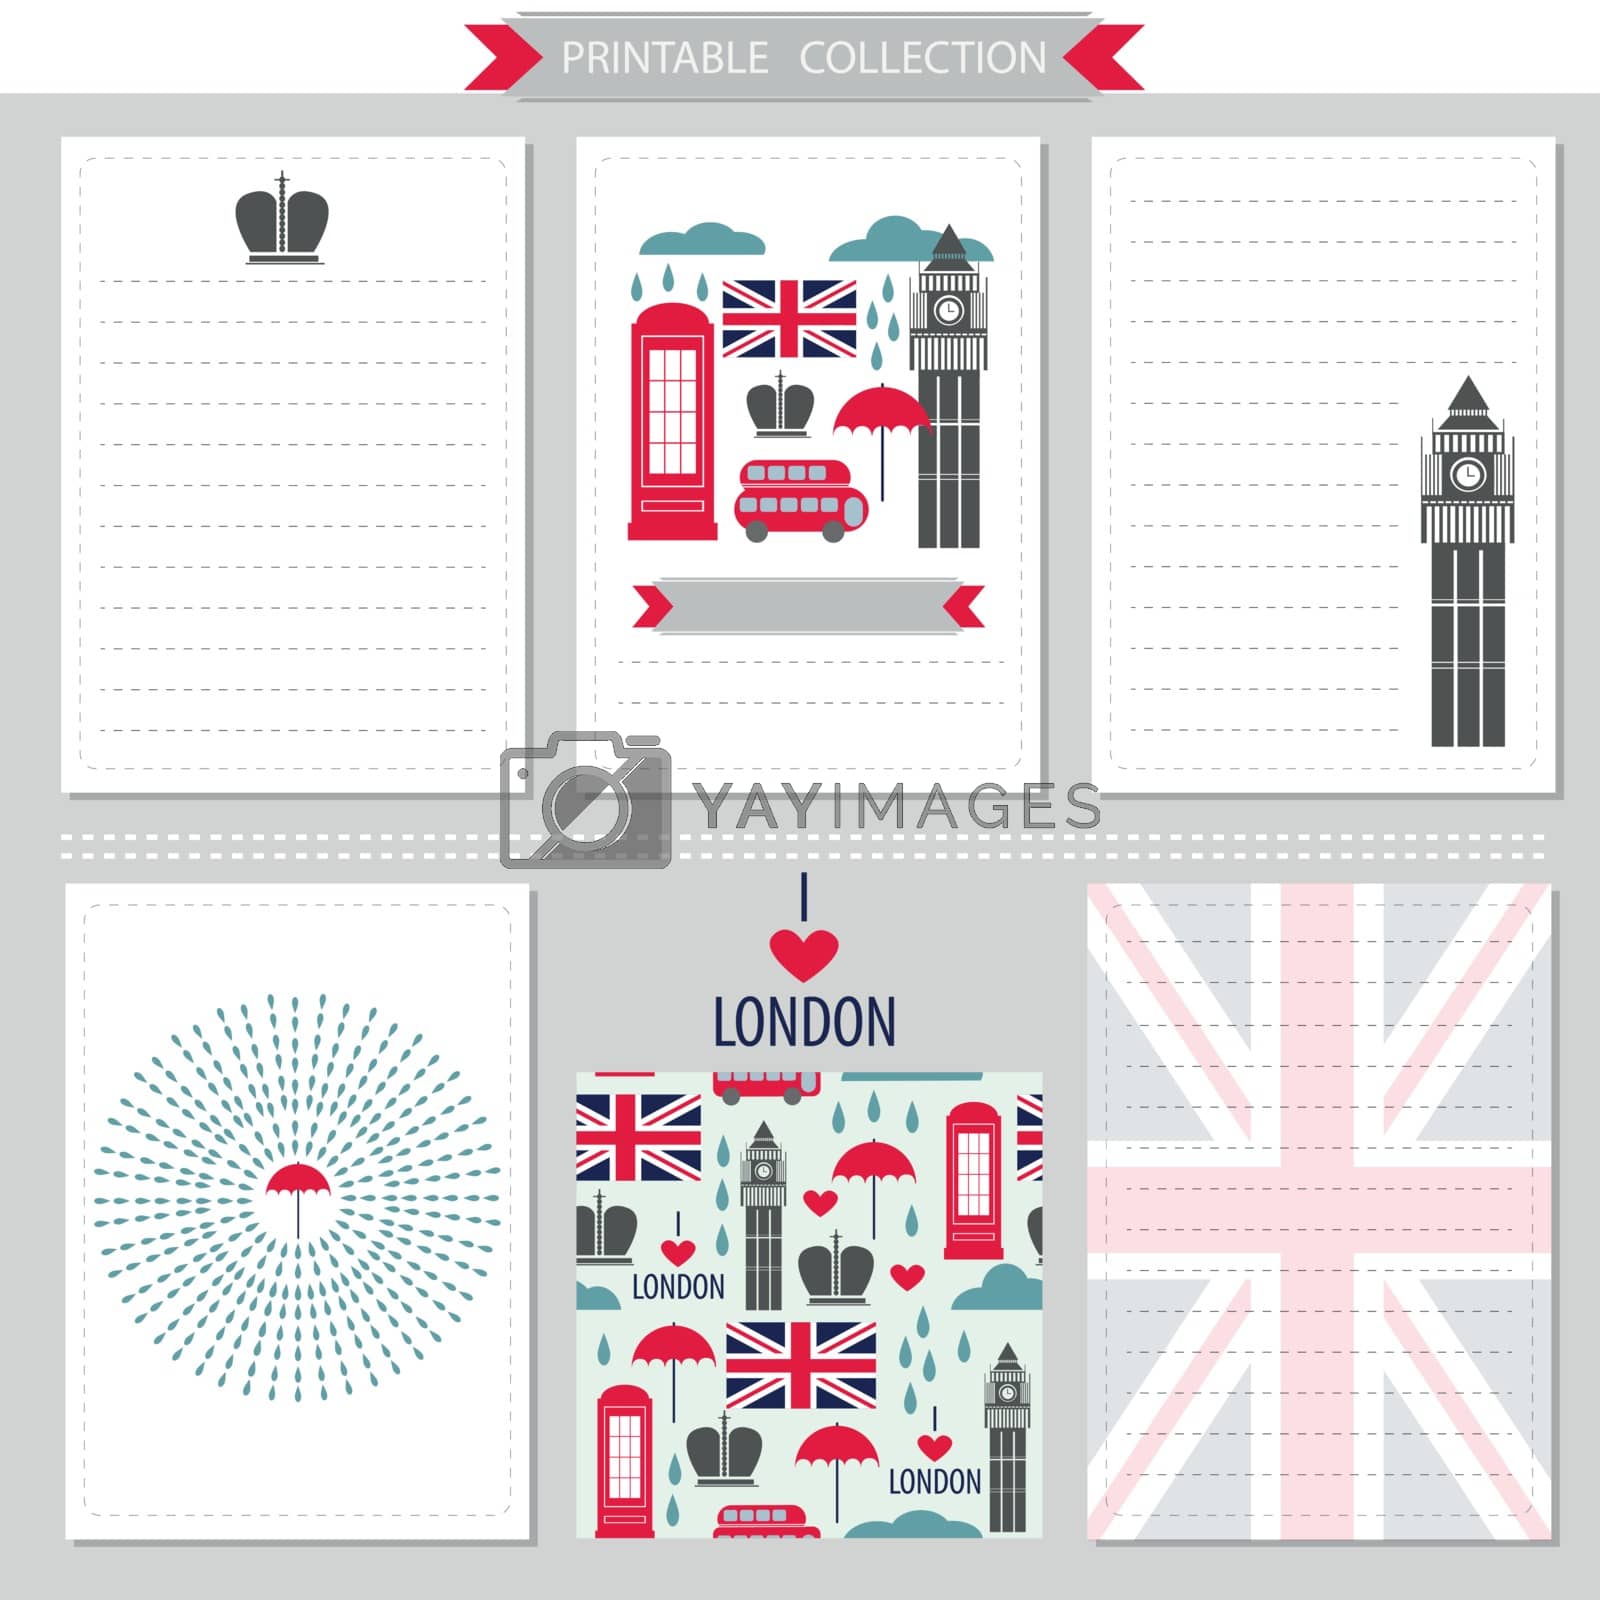 Royalty free image of London United Kingdom printable collection  by natali_brill